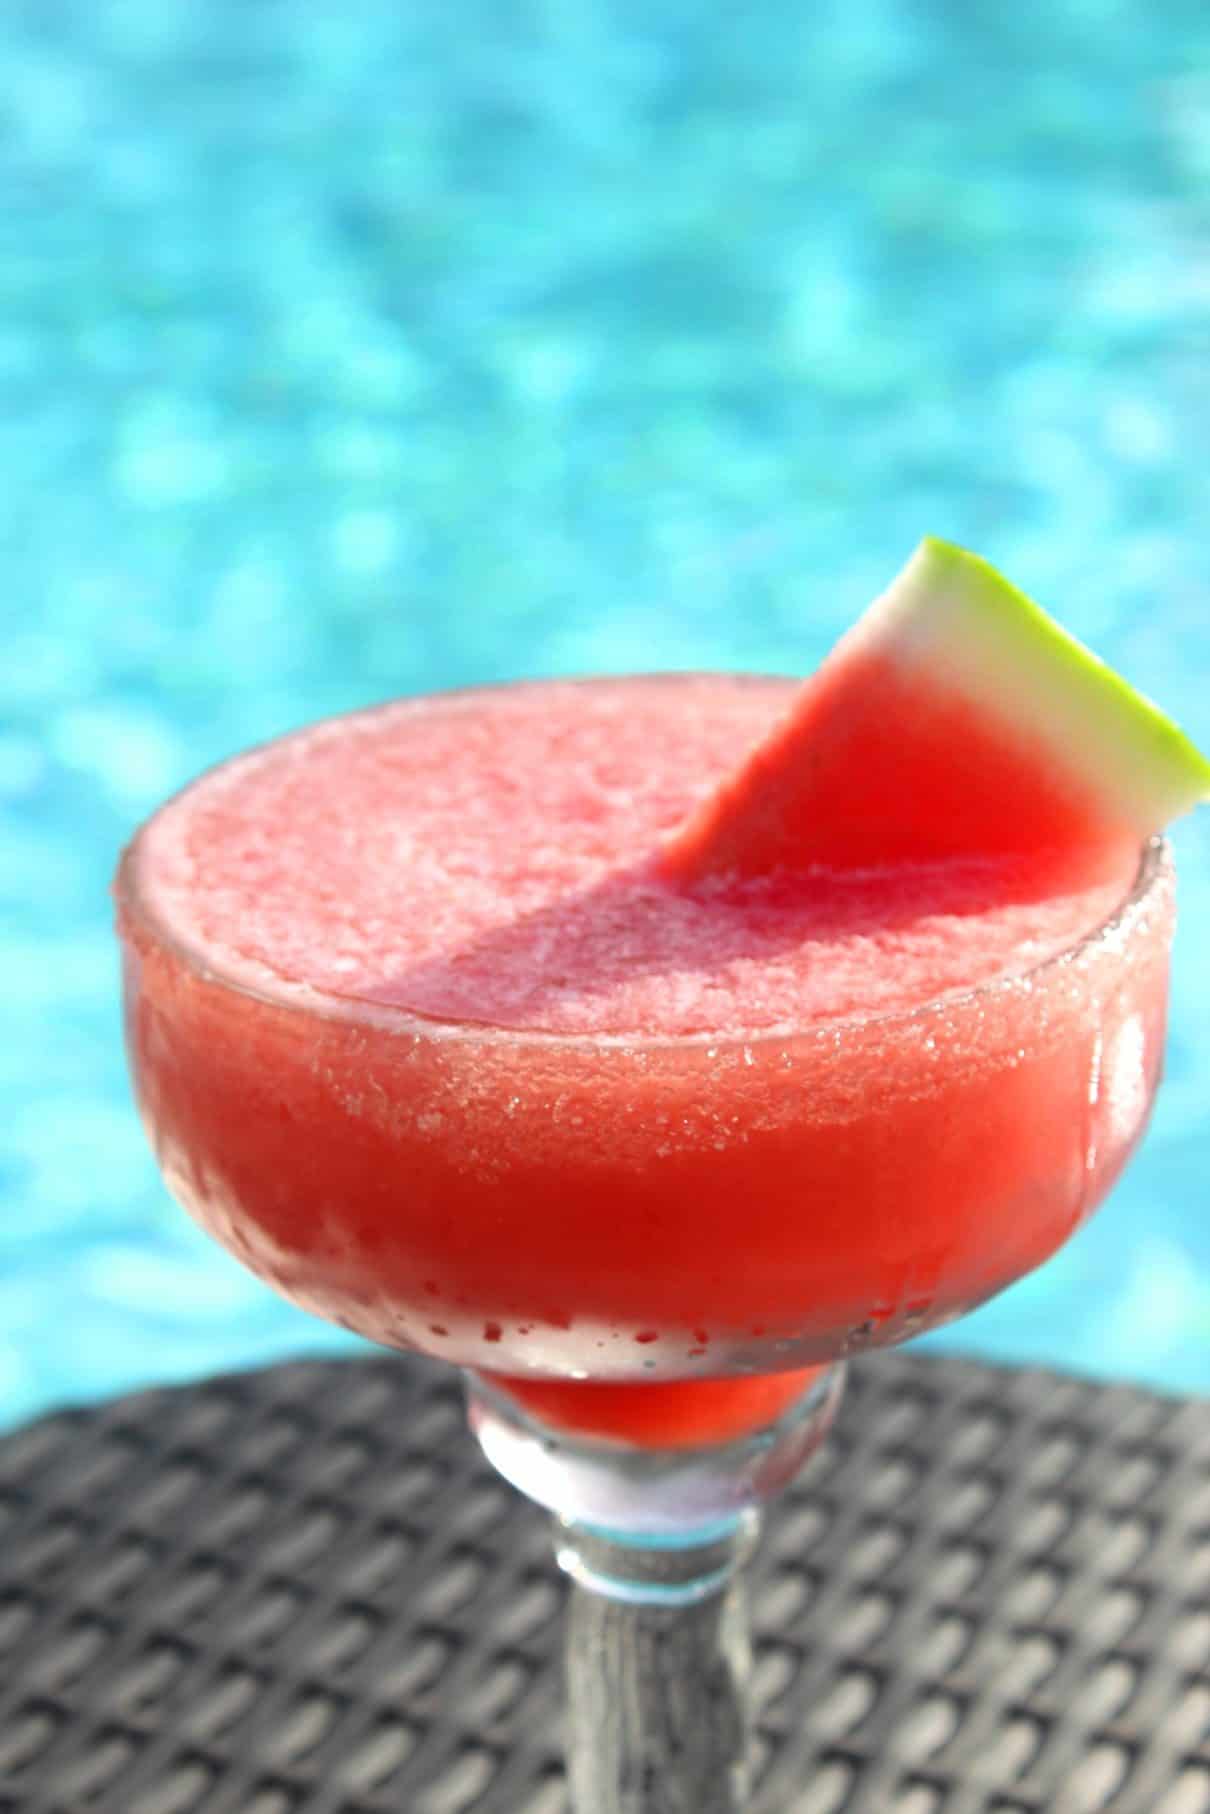 A frozen margarita drink made with watermelon and garnished with a watermelon slice, served by the pool!